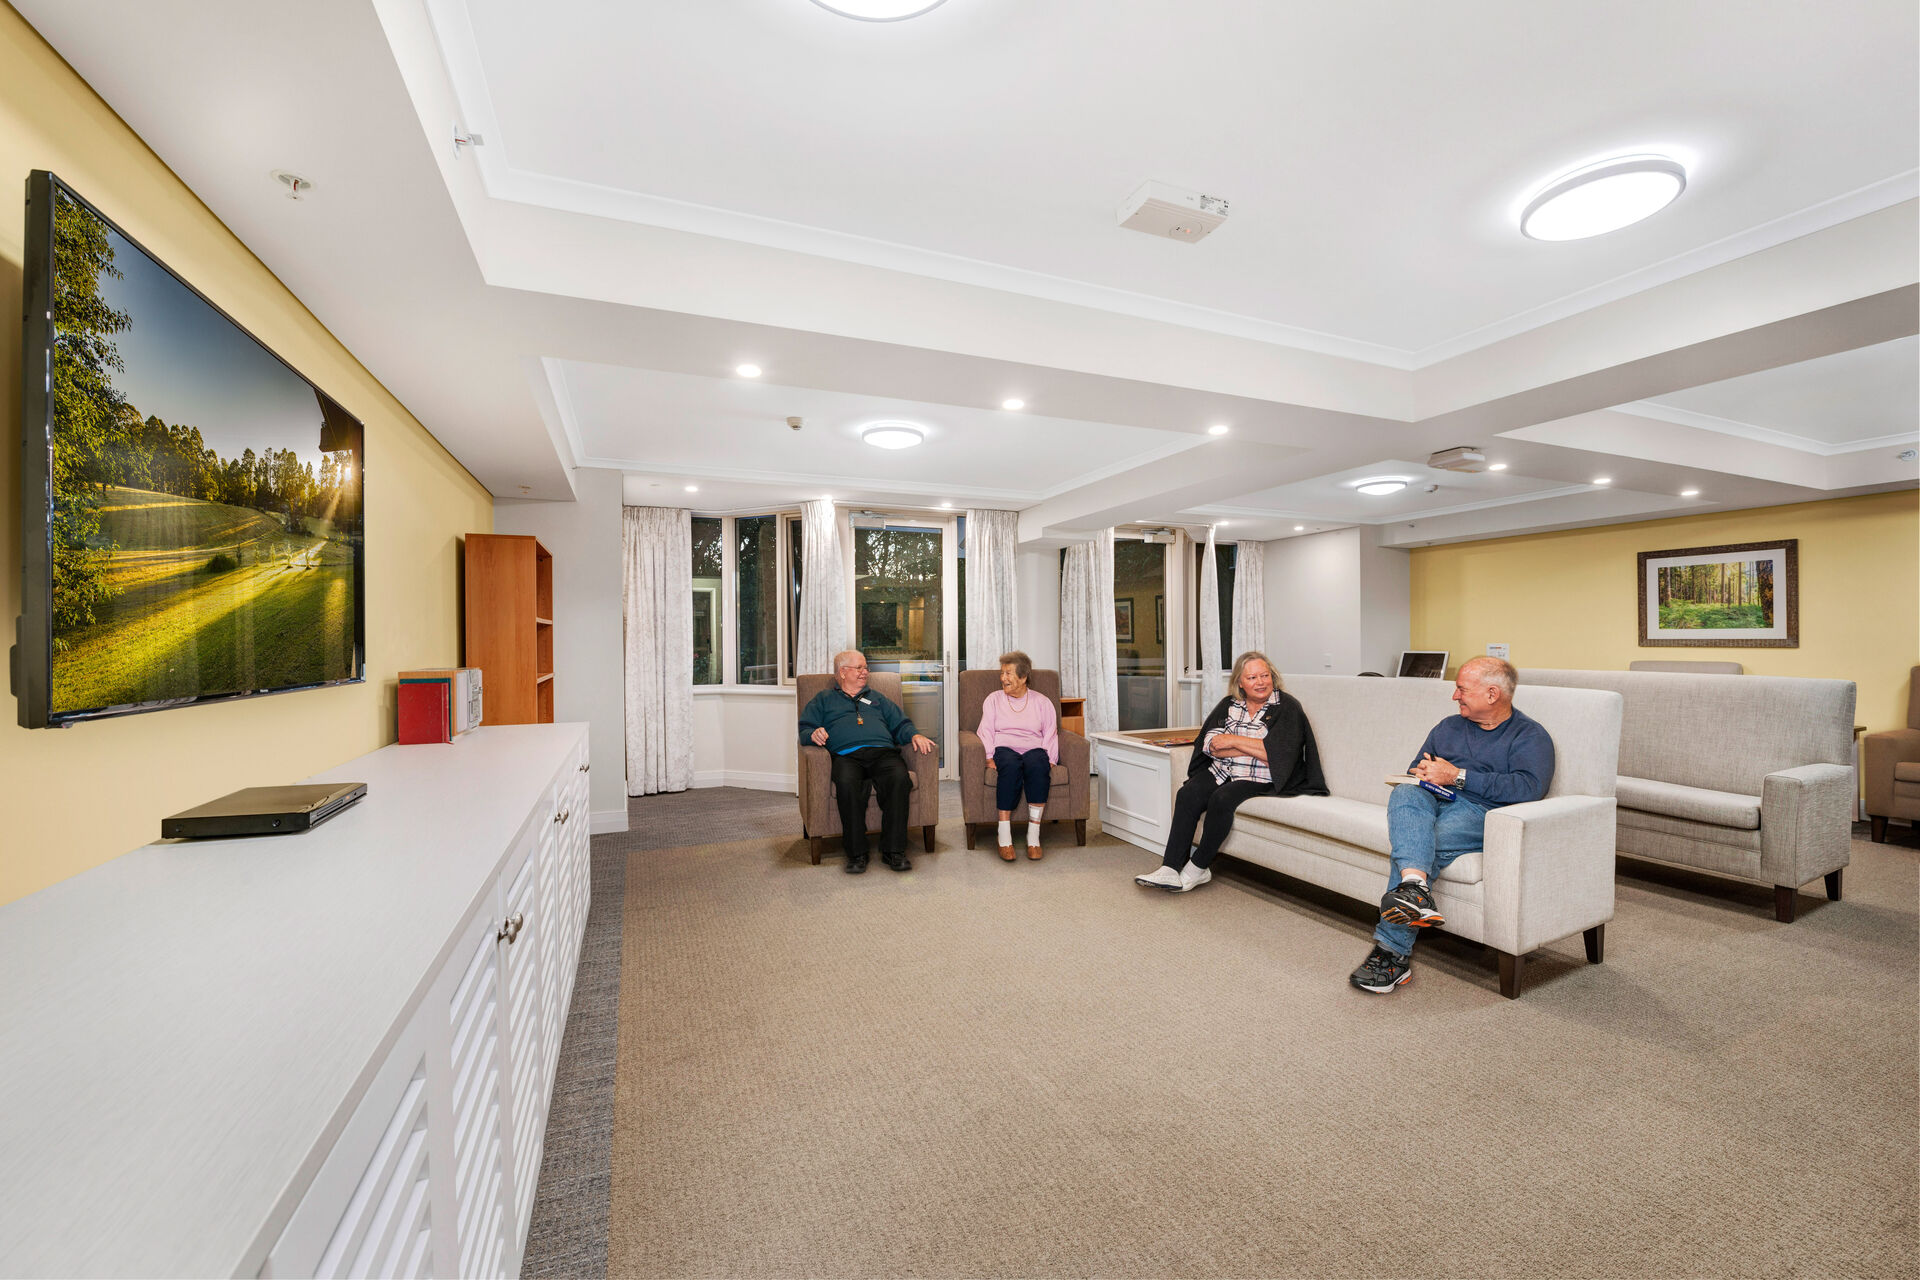 spacious communal lounge room with couches for aged care residents to socialise and watch television at baptistcare orana centre aged care home in point clare nsw central coast